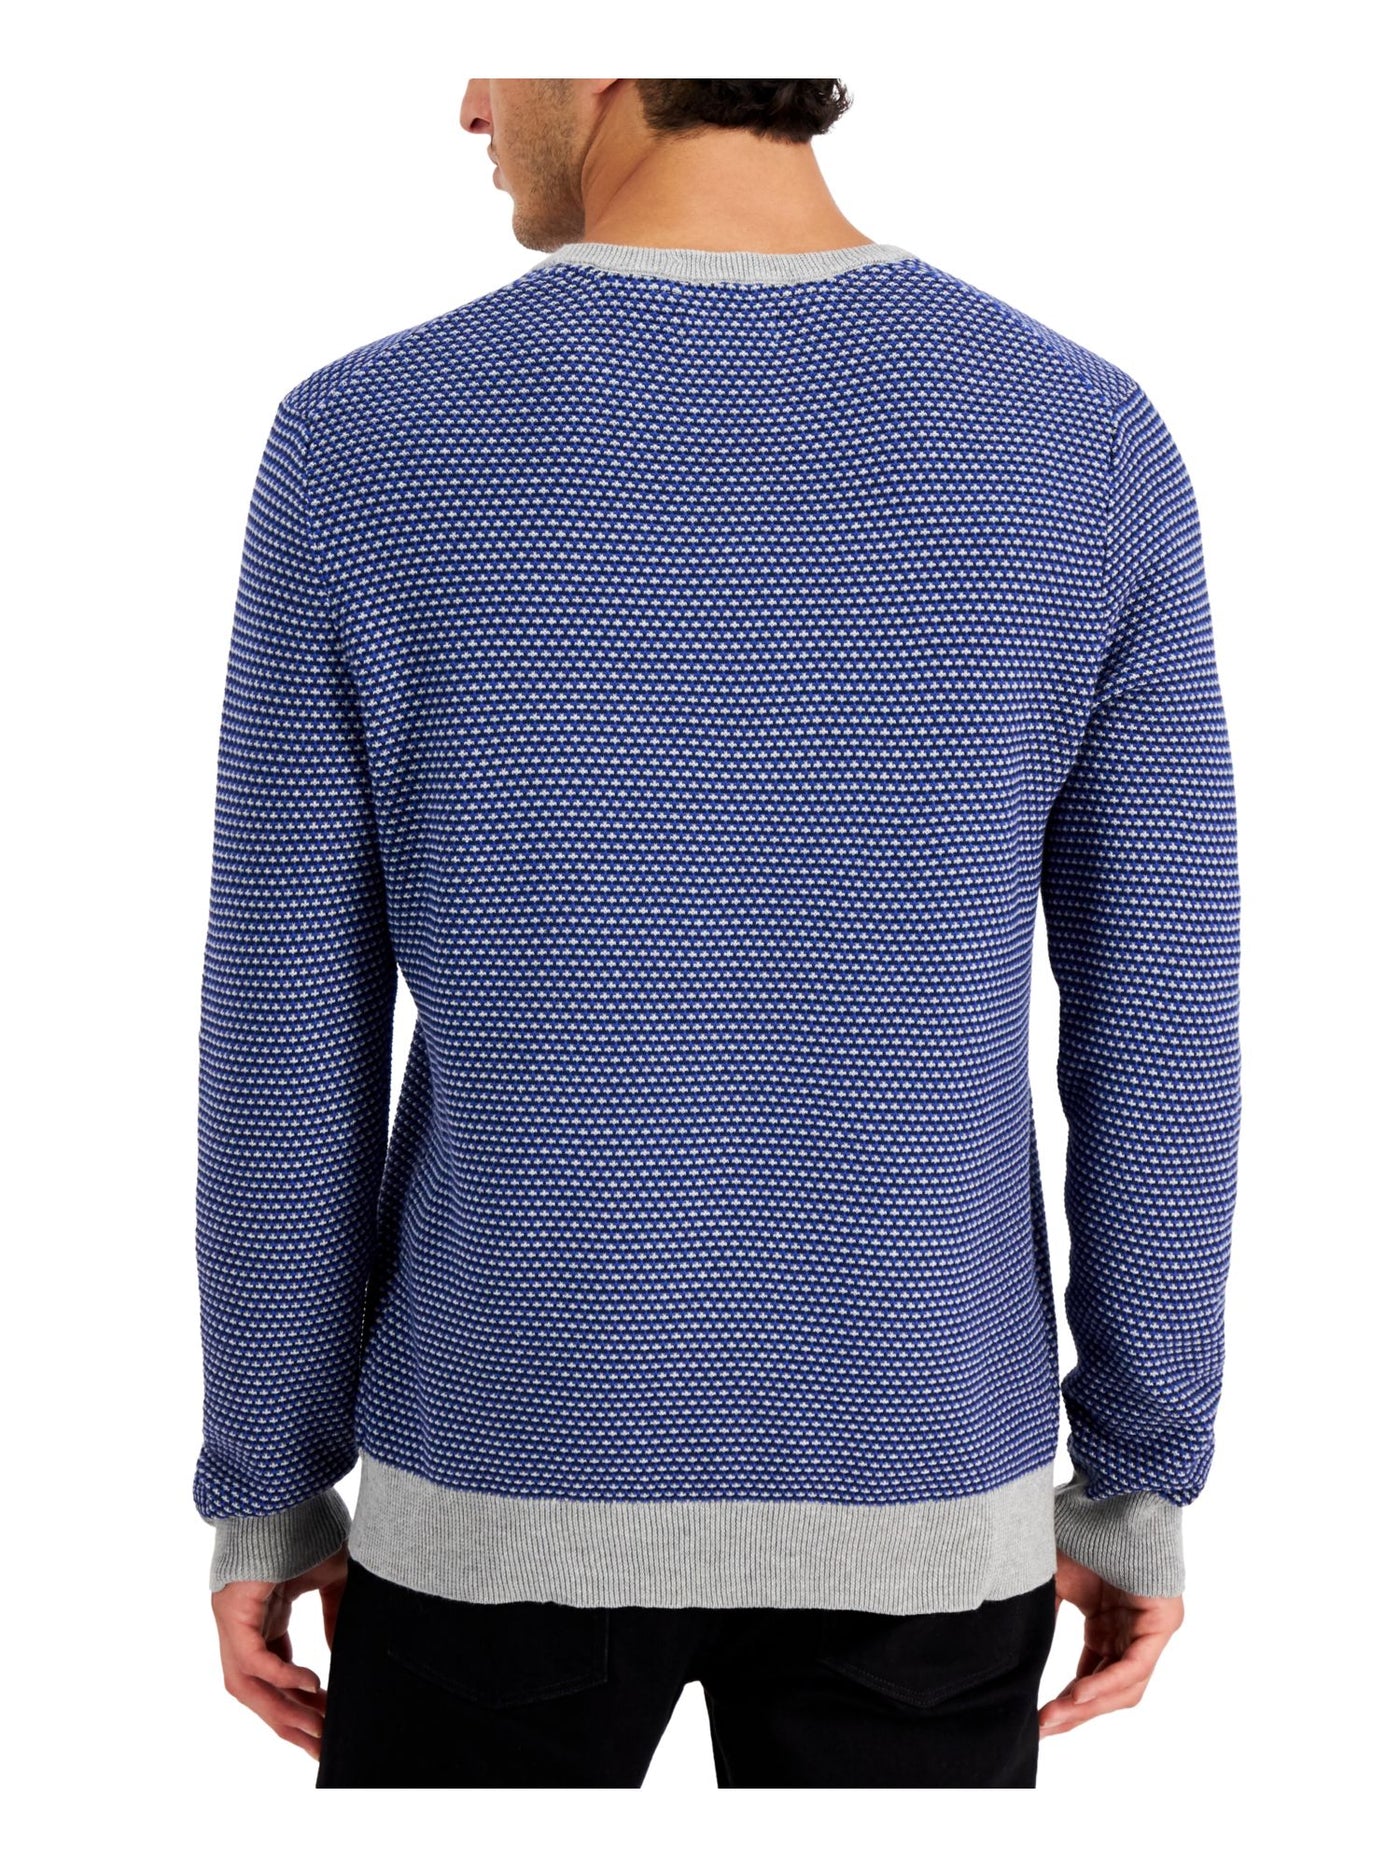 CLUBROOM Mens Elevated Navy Patterned Crew Neck Classic Fit Knit Pullover Sweater S